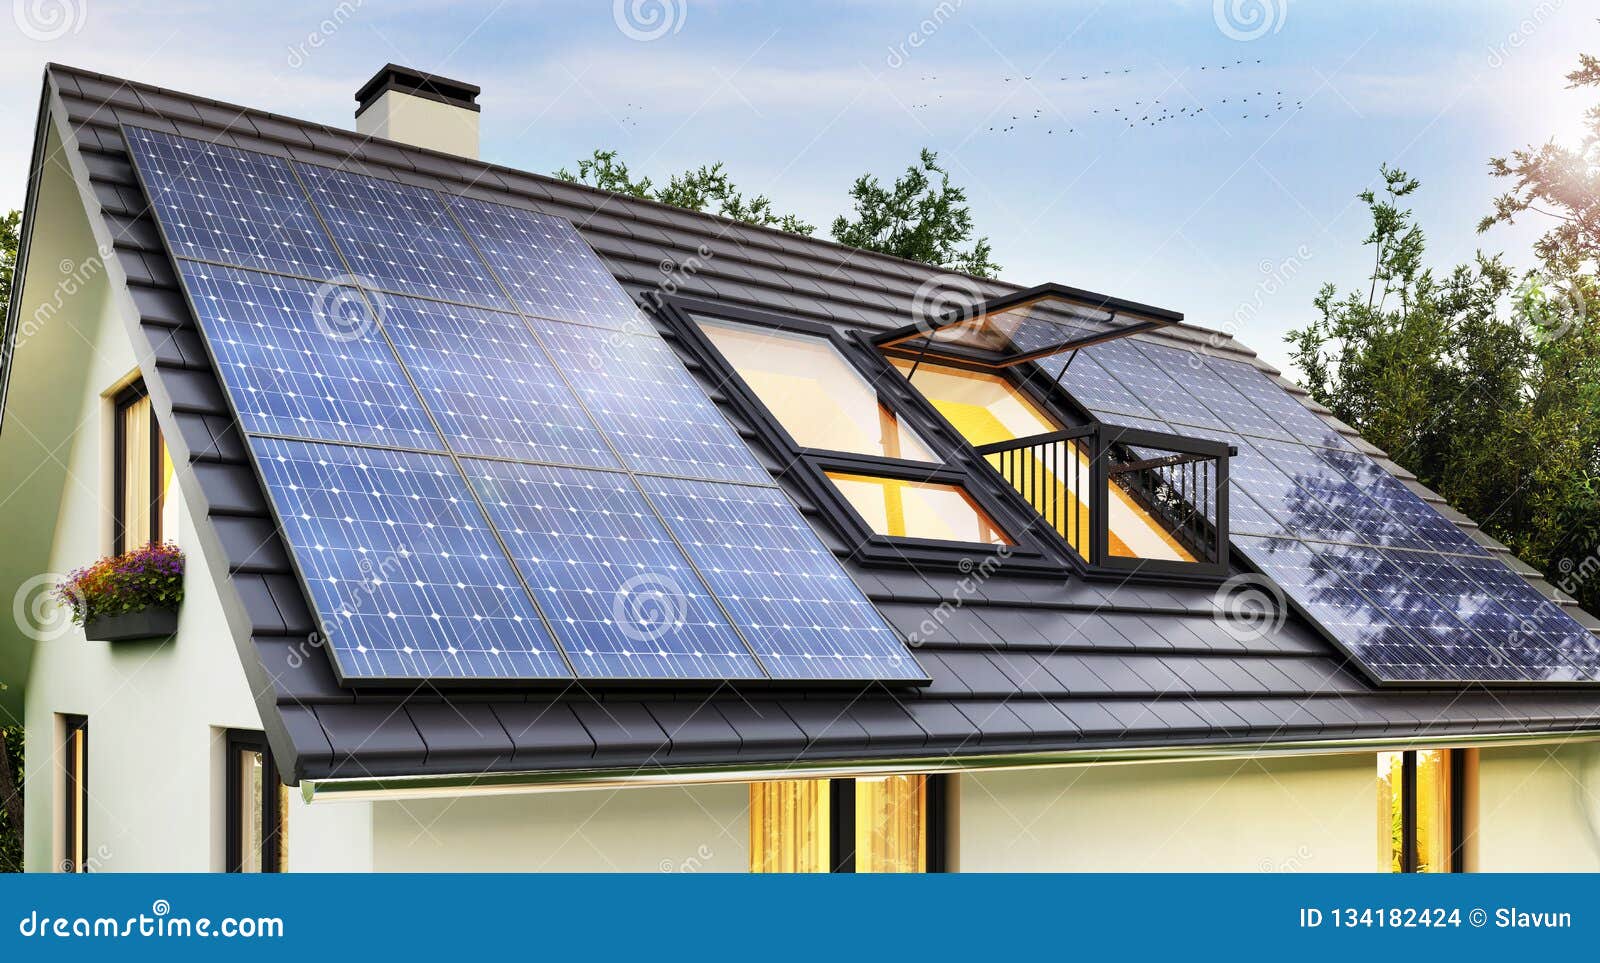 solar panels on the roof of the modern house